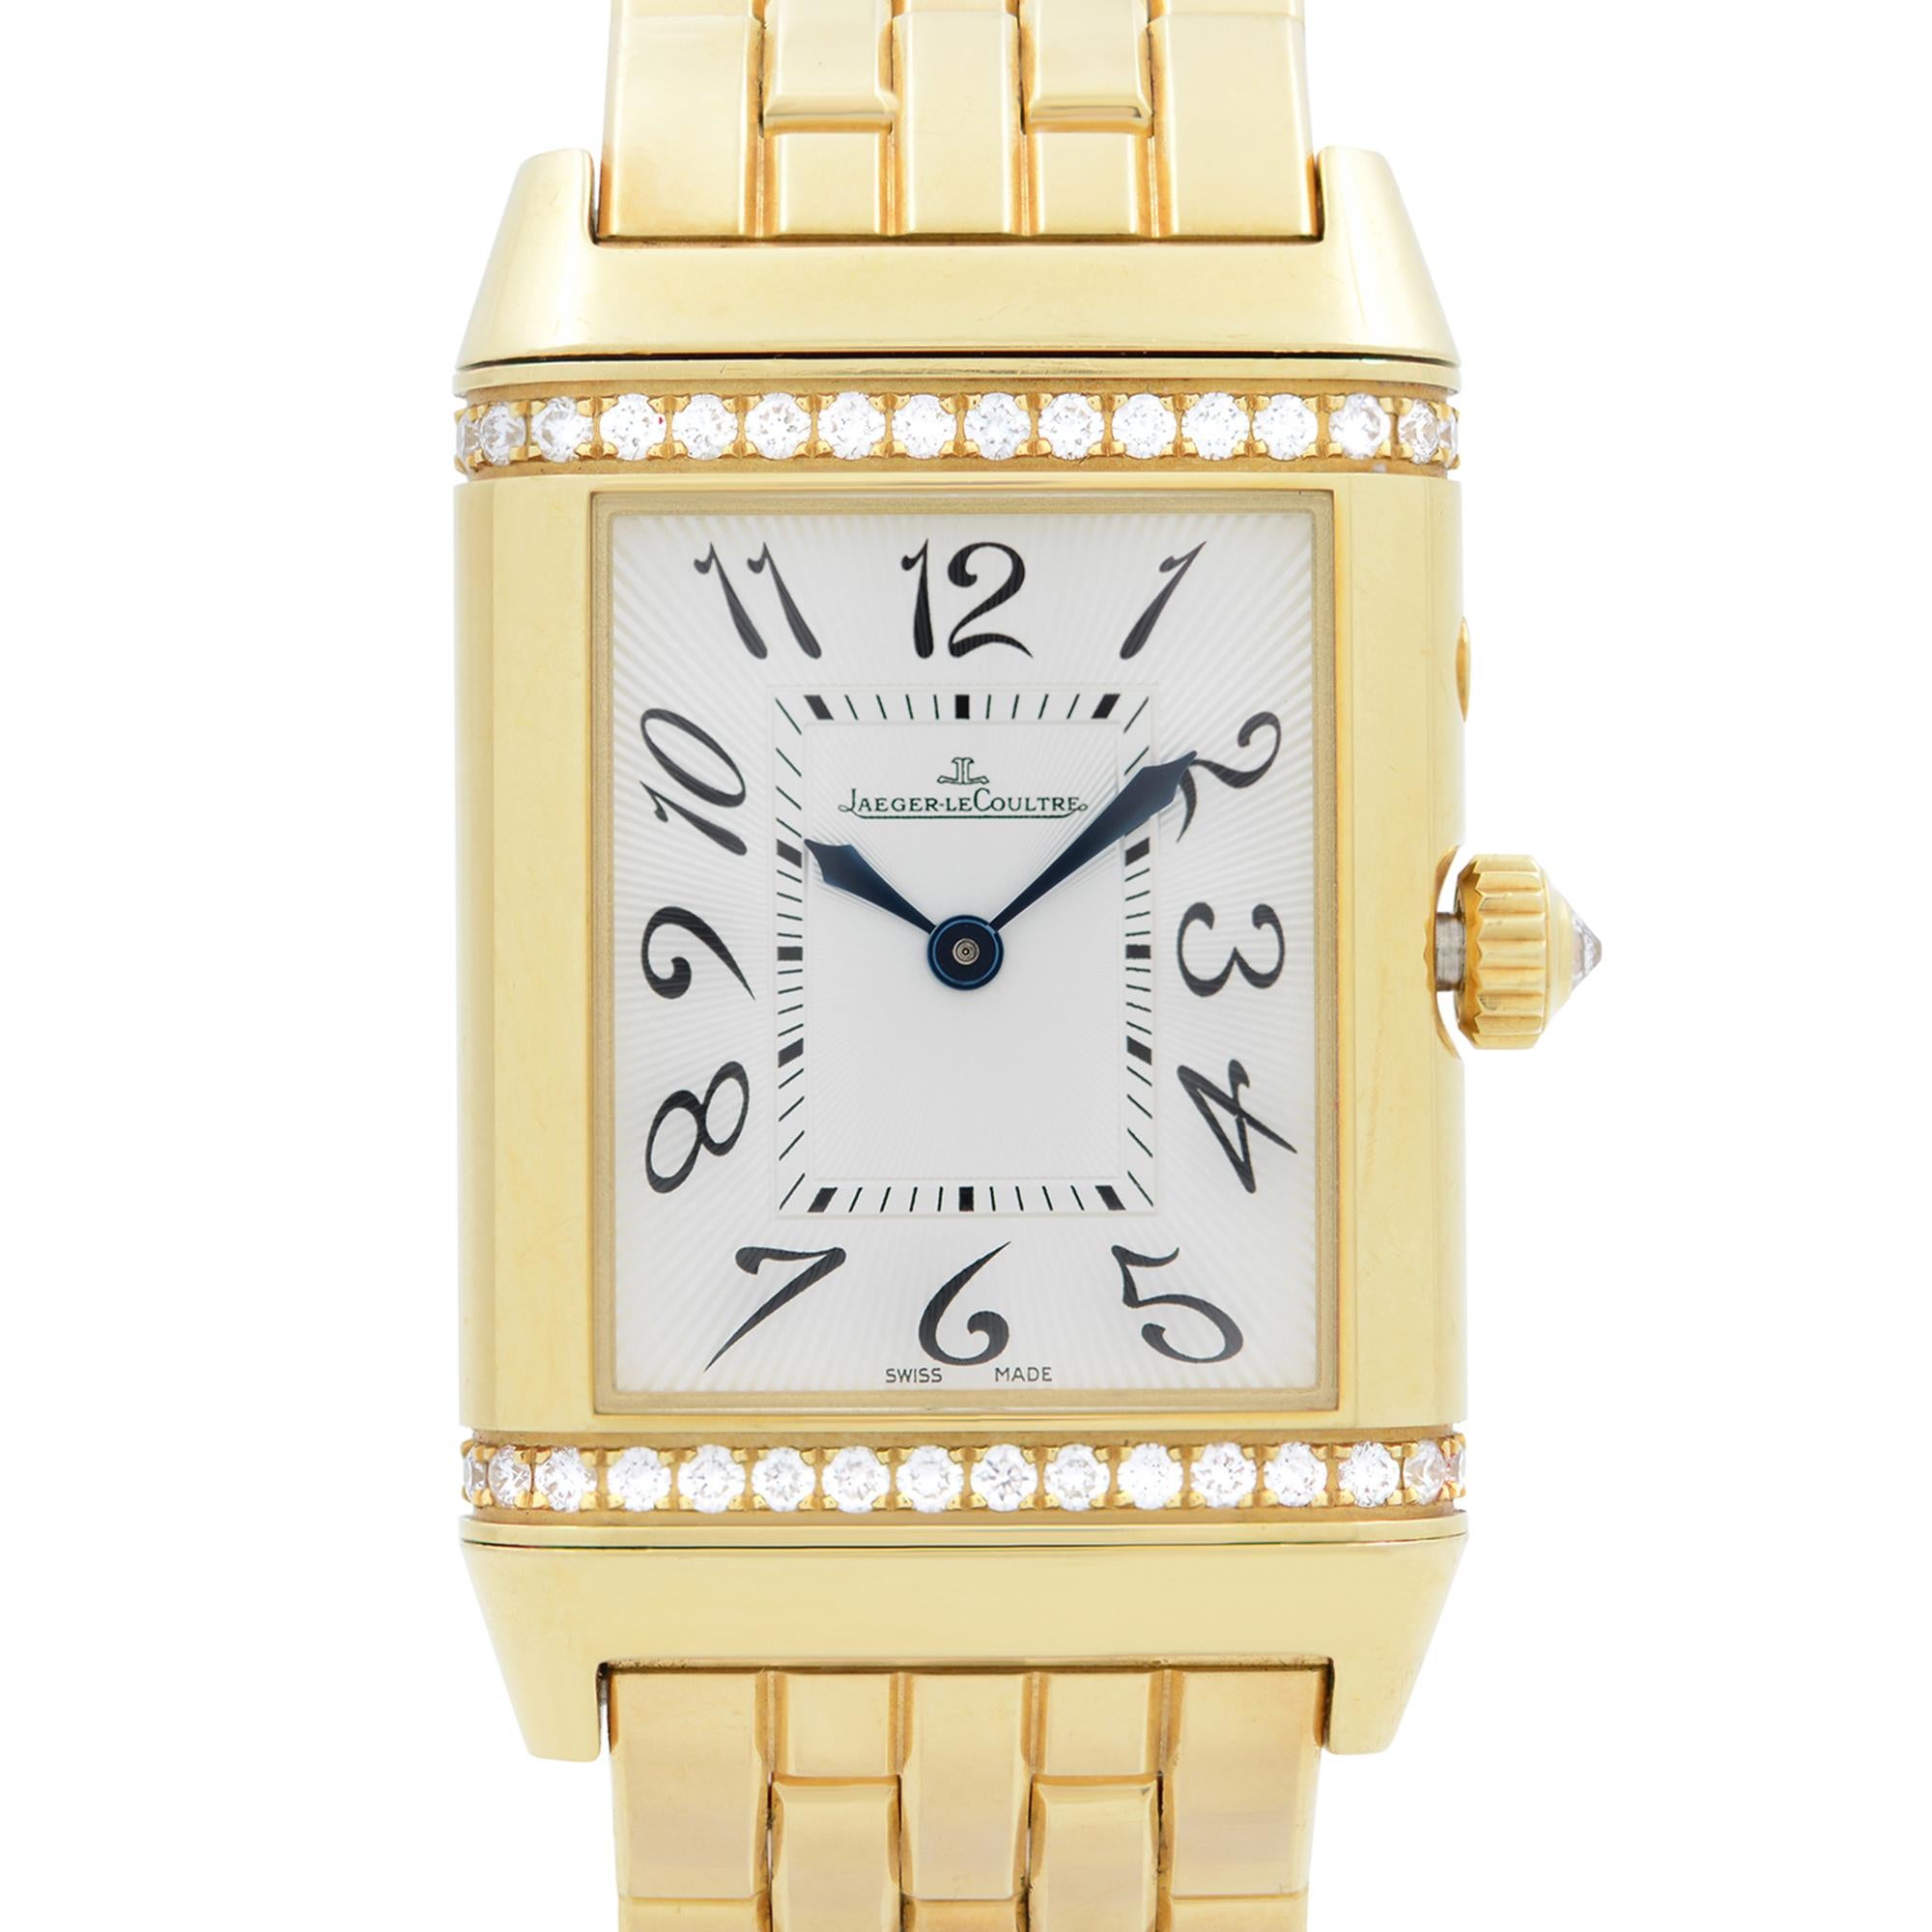 Pre-owned Jaeger-LeCoultre Reverso Duetto 18K Yellow Gold Diamond Hand-wind Ladies Watch 269.1.54.  Dual time. This Beautiful Timepiece Features: Reversible Case with Different Dials on Each Side as Shown on Pictures. No Original Box and Papers are